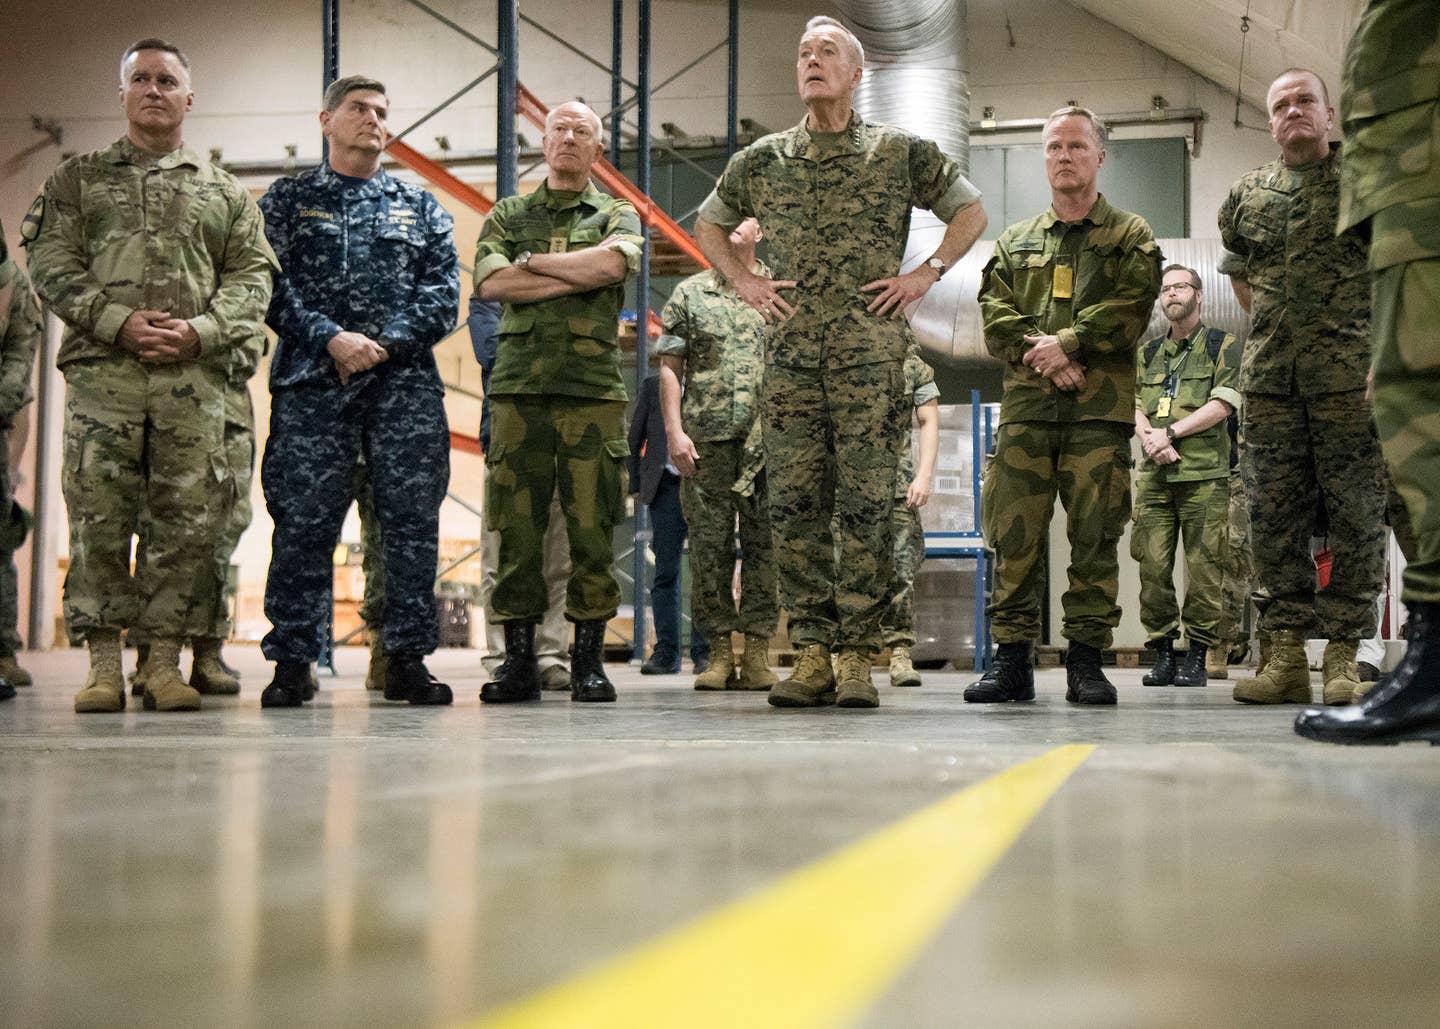 Marine Corps Gen. Joseph F. Dunford Jr., chairman of the Joint Chiefs of Staff, and Admiral Haakon Bruun-Hanssen, Norwegian Chief of Defence, tour the Marine Corps Prepositioning Program-Norway in the Frigaard Cave, Sept. 20, 2017.